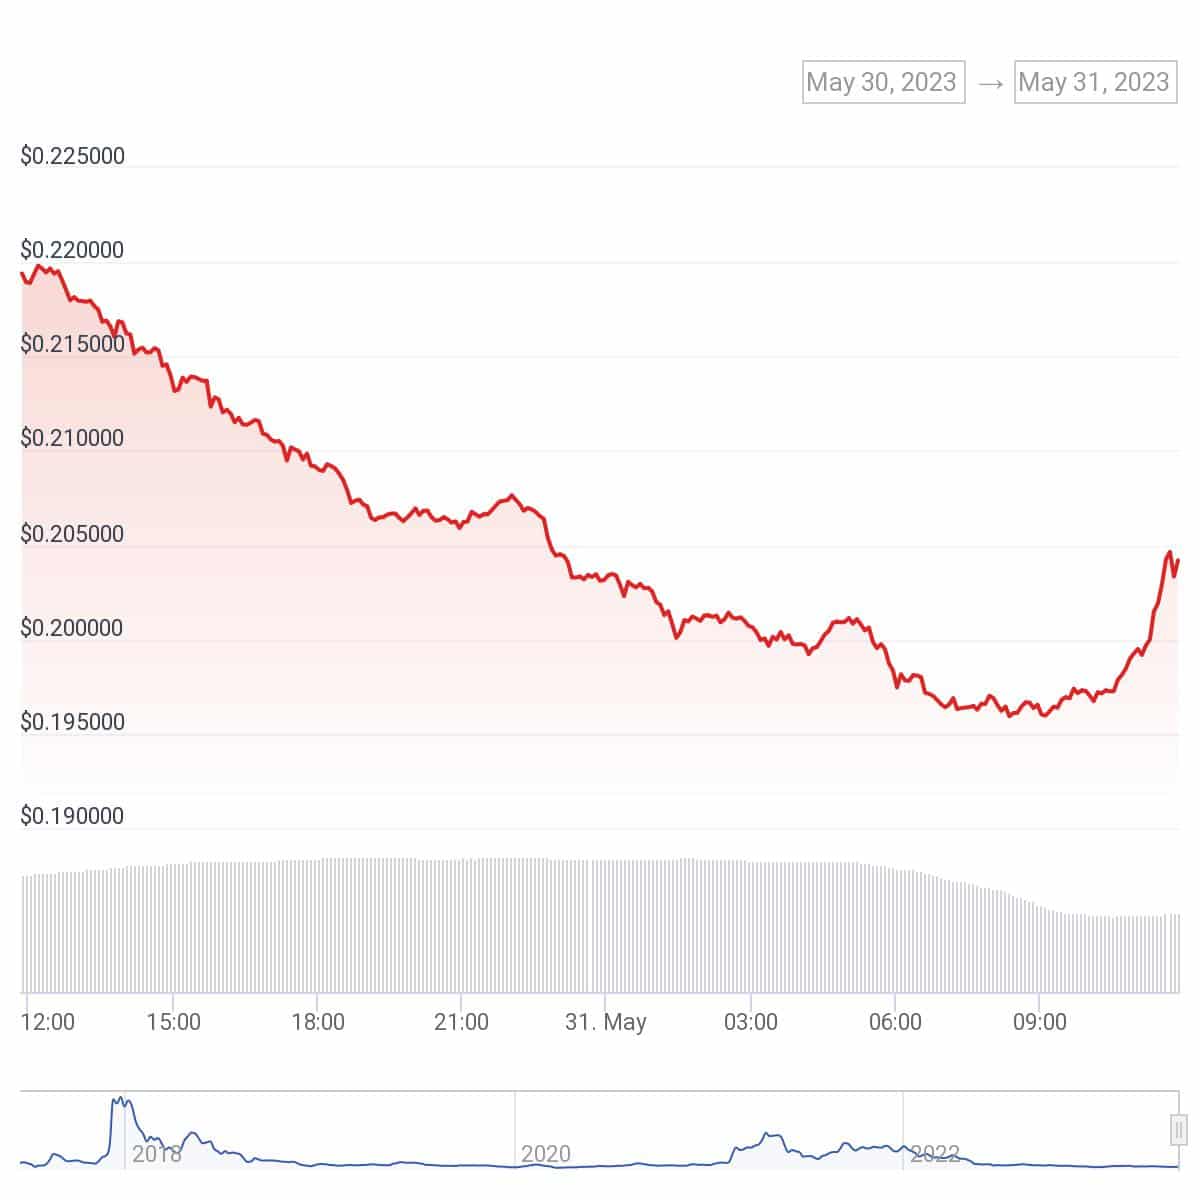 IOTA is down by over 10% as bitcoin and altcoins struggle  - 1